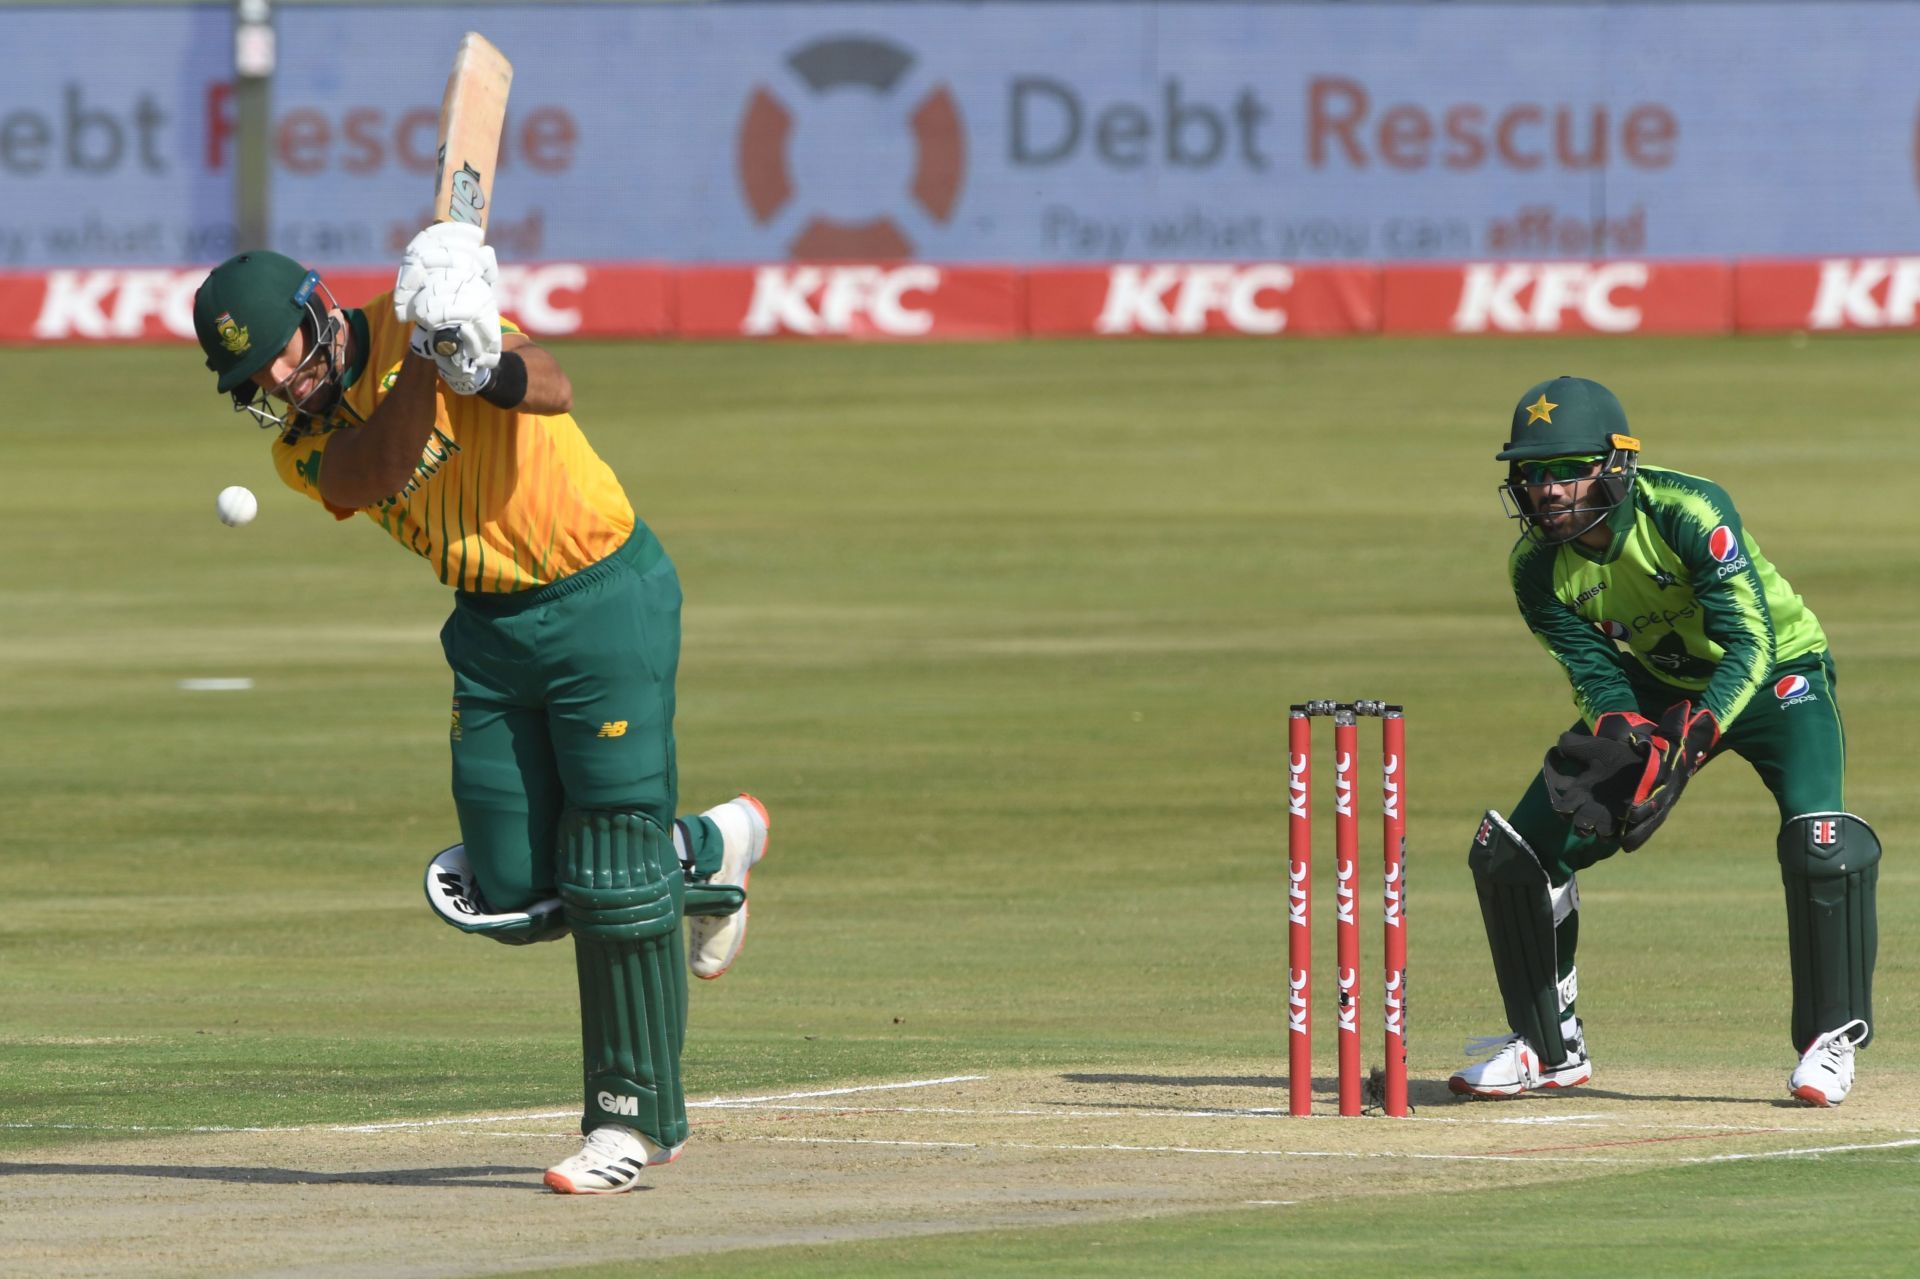 South Africa did not have a memorable 2021 in the ODI arena